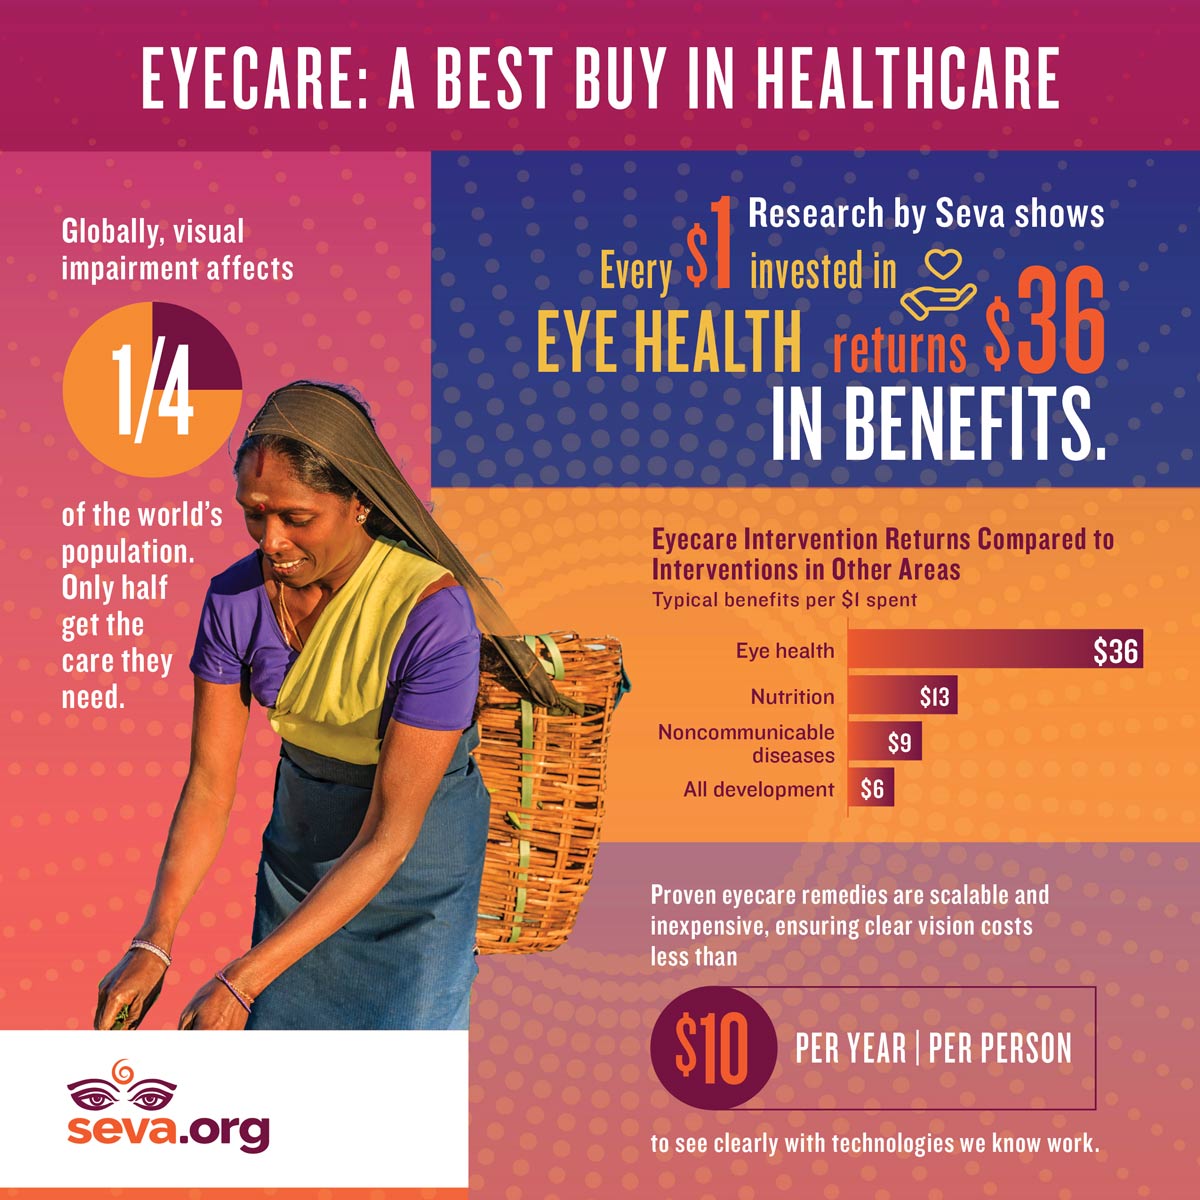 Eye care: A Best Buy in Healthcare. Research by Seva shows every $1 invested in eye health returns $36 in benefits. Globally, visual impairment affects 1/4 of the world’s population. Only half get the care they need. Eye care Intervention Returns Compared to Interventions in Other Areas - Typical benefits per $1 spent: Eye health = $36; Nutrition = $13; Noncommunicable diseases = $9; All development = $6. Proven eye care remedies are scalable and inexpensive, ensuring clear vision costs less than $10 per year per person to see clearly with technologies we know work.